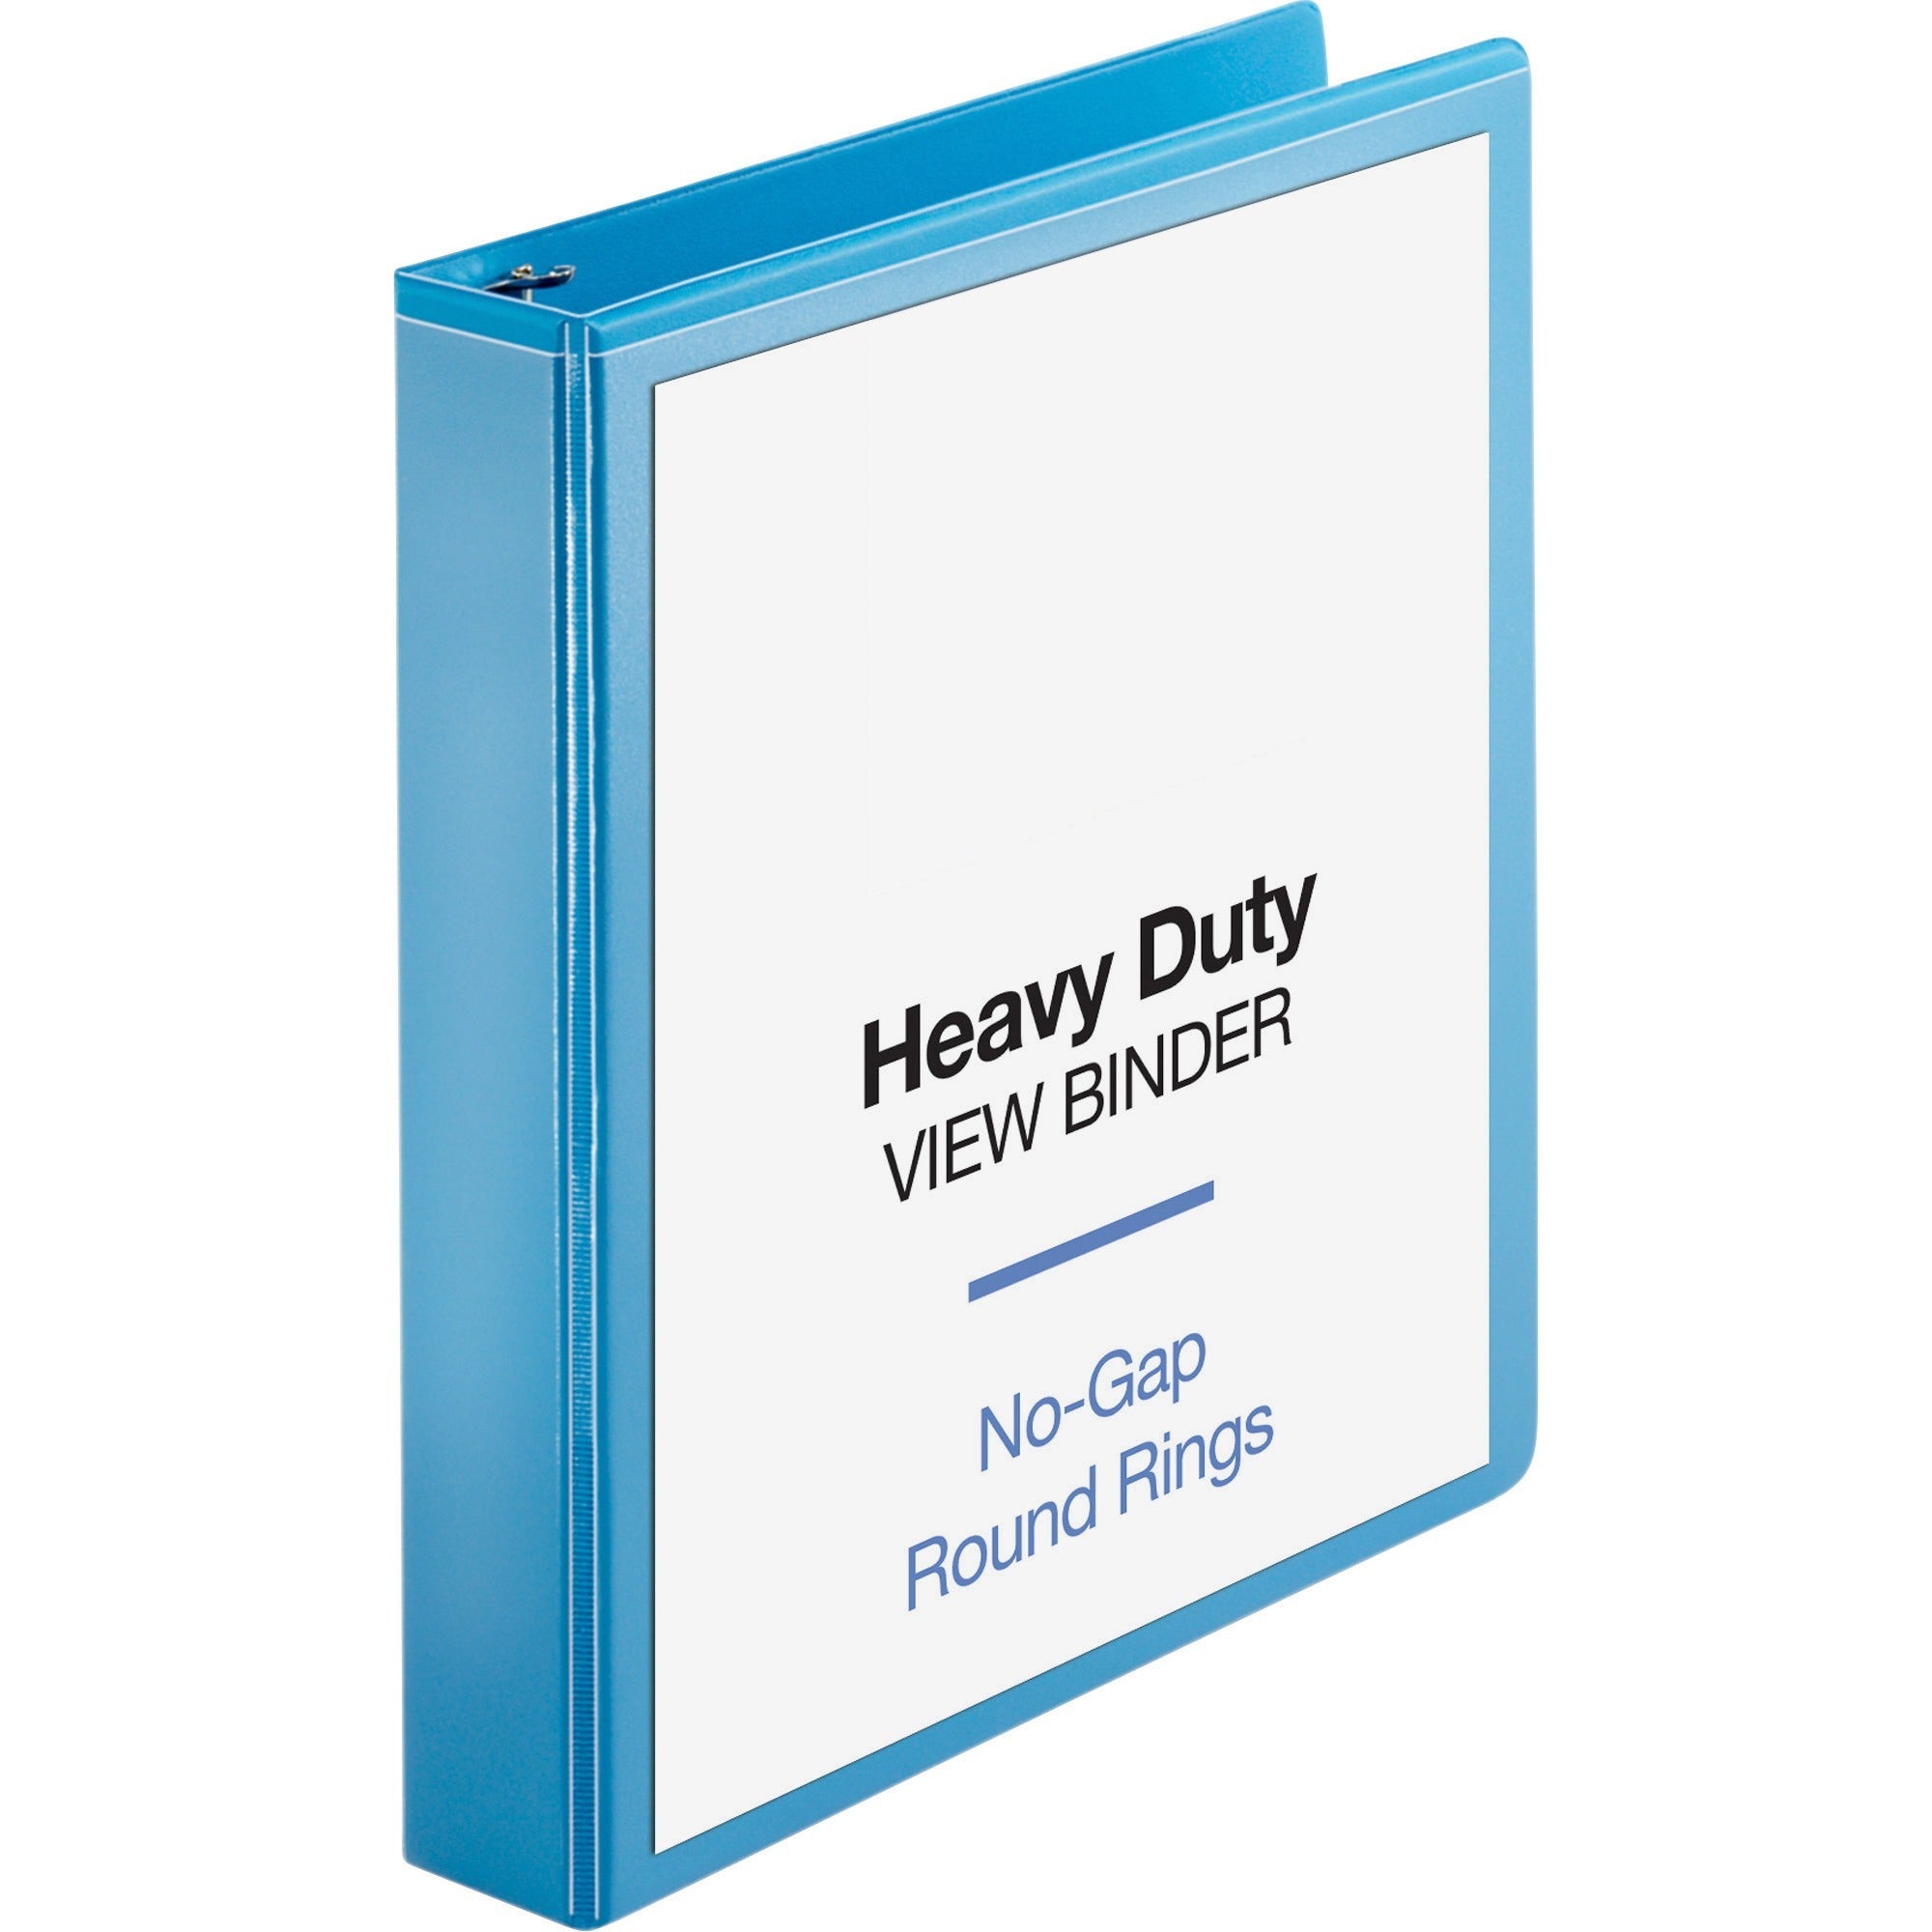 business-source-heavy-duty-view-binder-1-1-2-binder-capacity-letter-8-1-2-x-11-sheet-size-350-sheet-capacity-round-ring-fasteners-2-internal-pockets-polypropylene-covered-chipboard-light-blue-wrinkle-free-non-glare-ink-tran_bsn19652 - 1